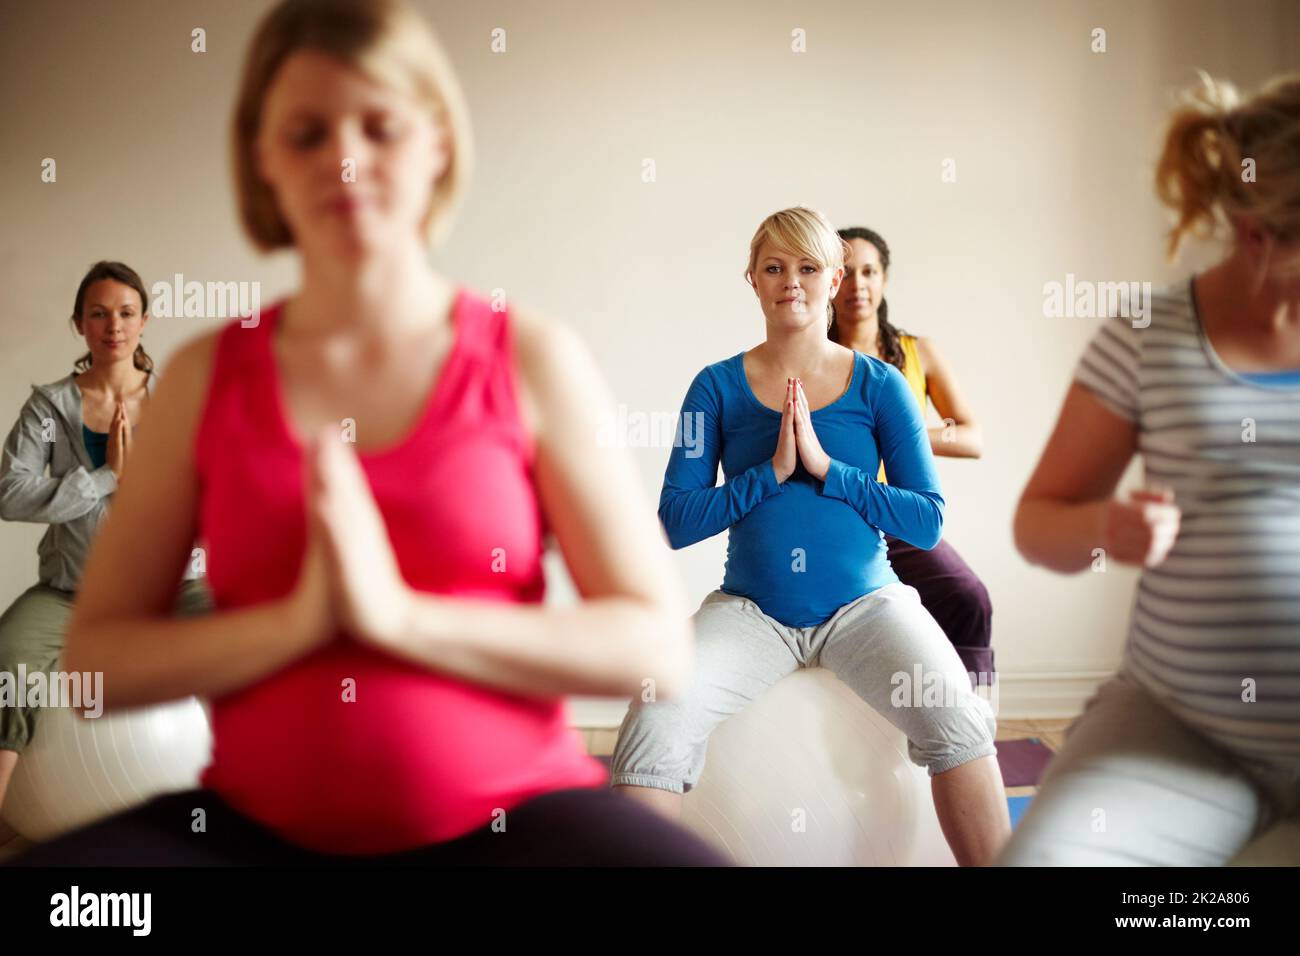 Blissful maternity. A multi-ethnic group of pregnant women meditating on exercise balls in a yoga class. Stock Photo